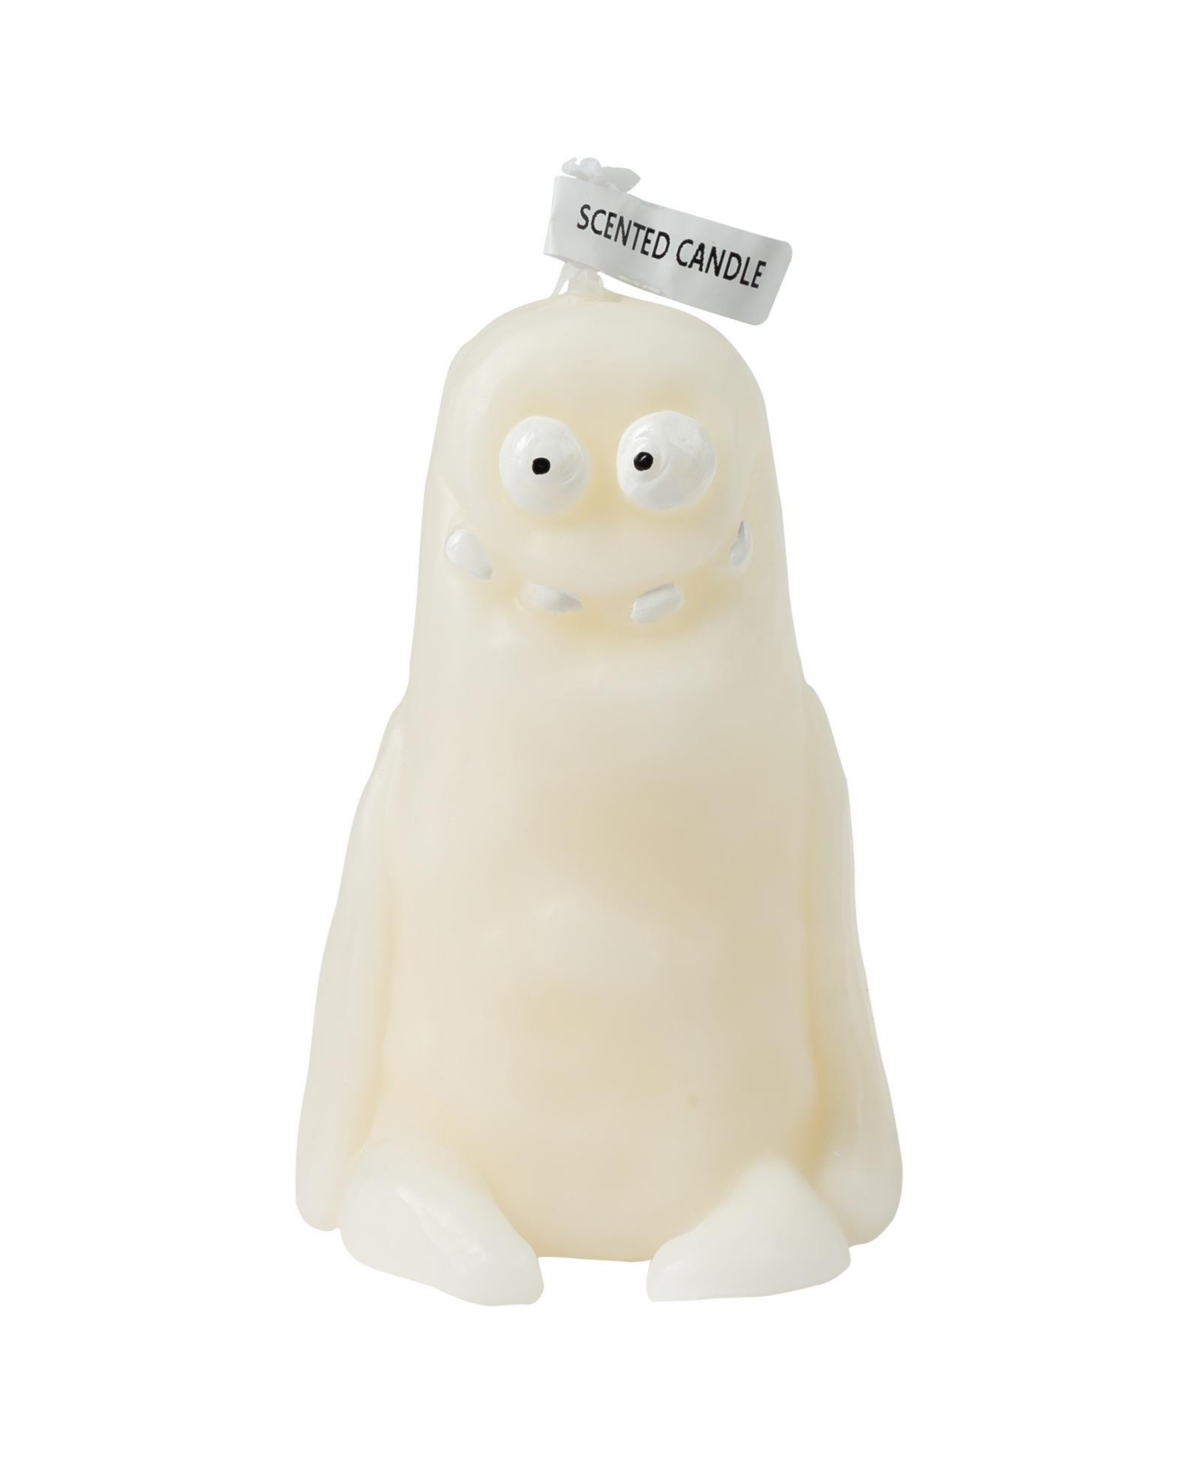 Thin Mudman Shaped Scented Candle - White